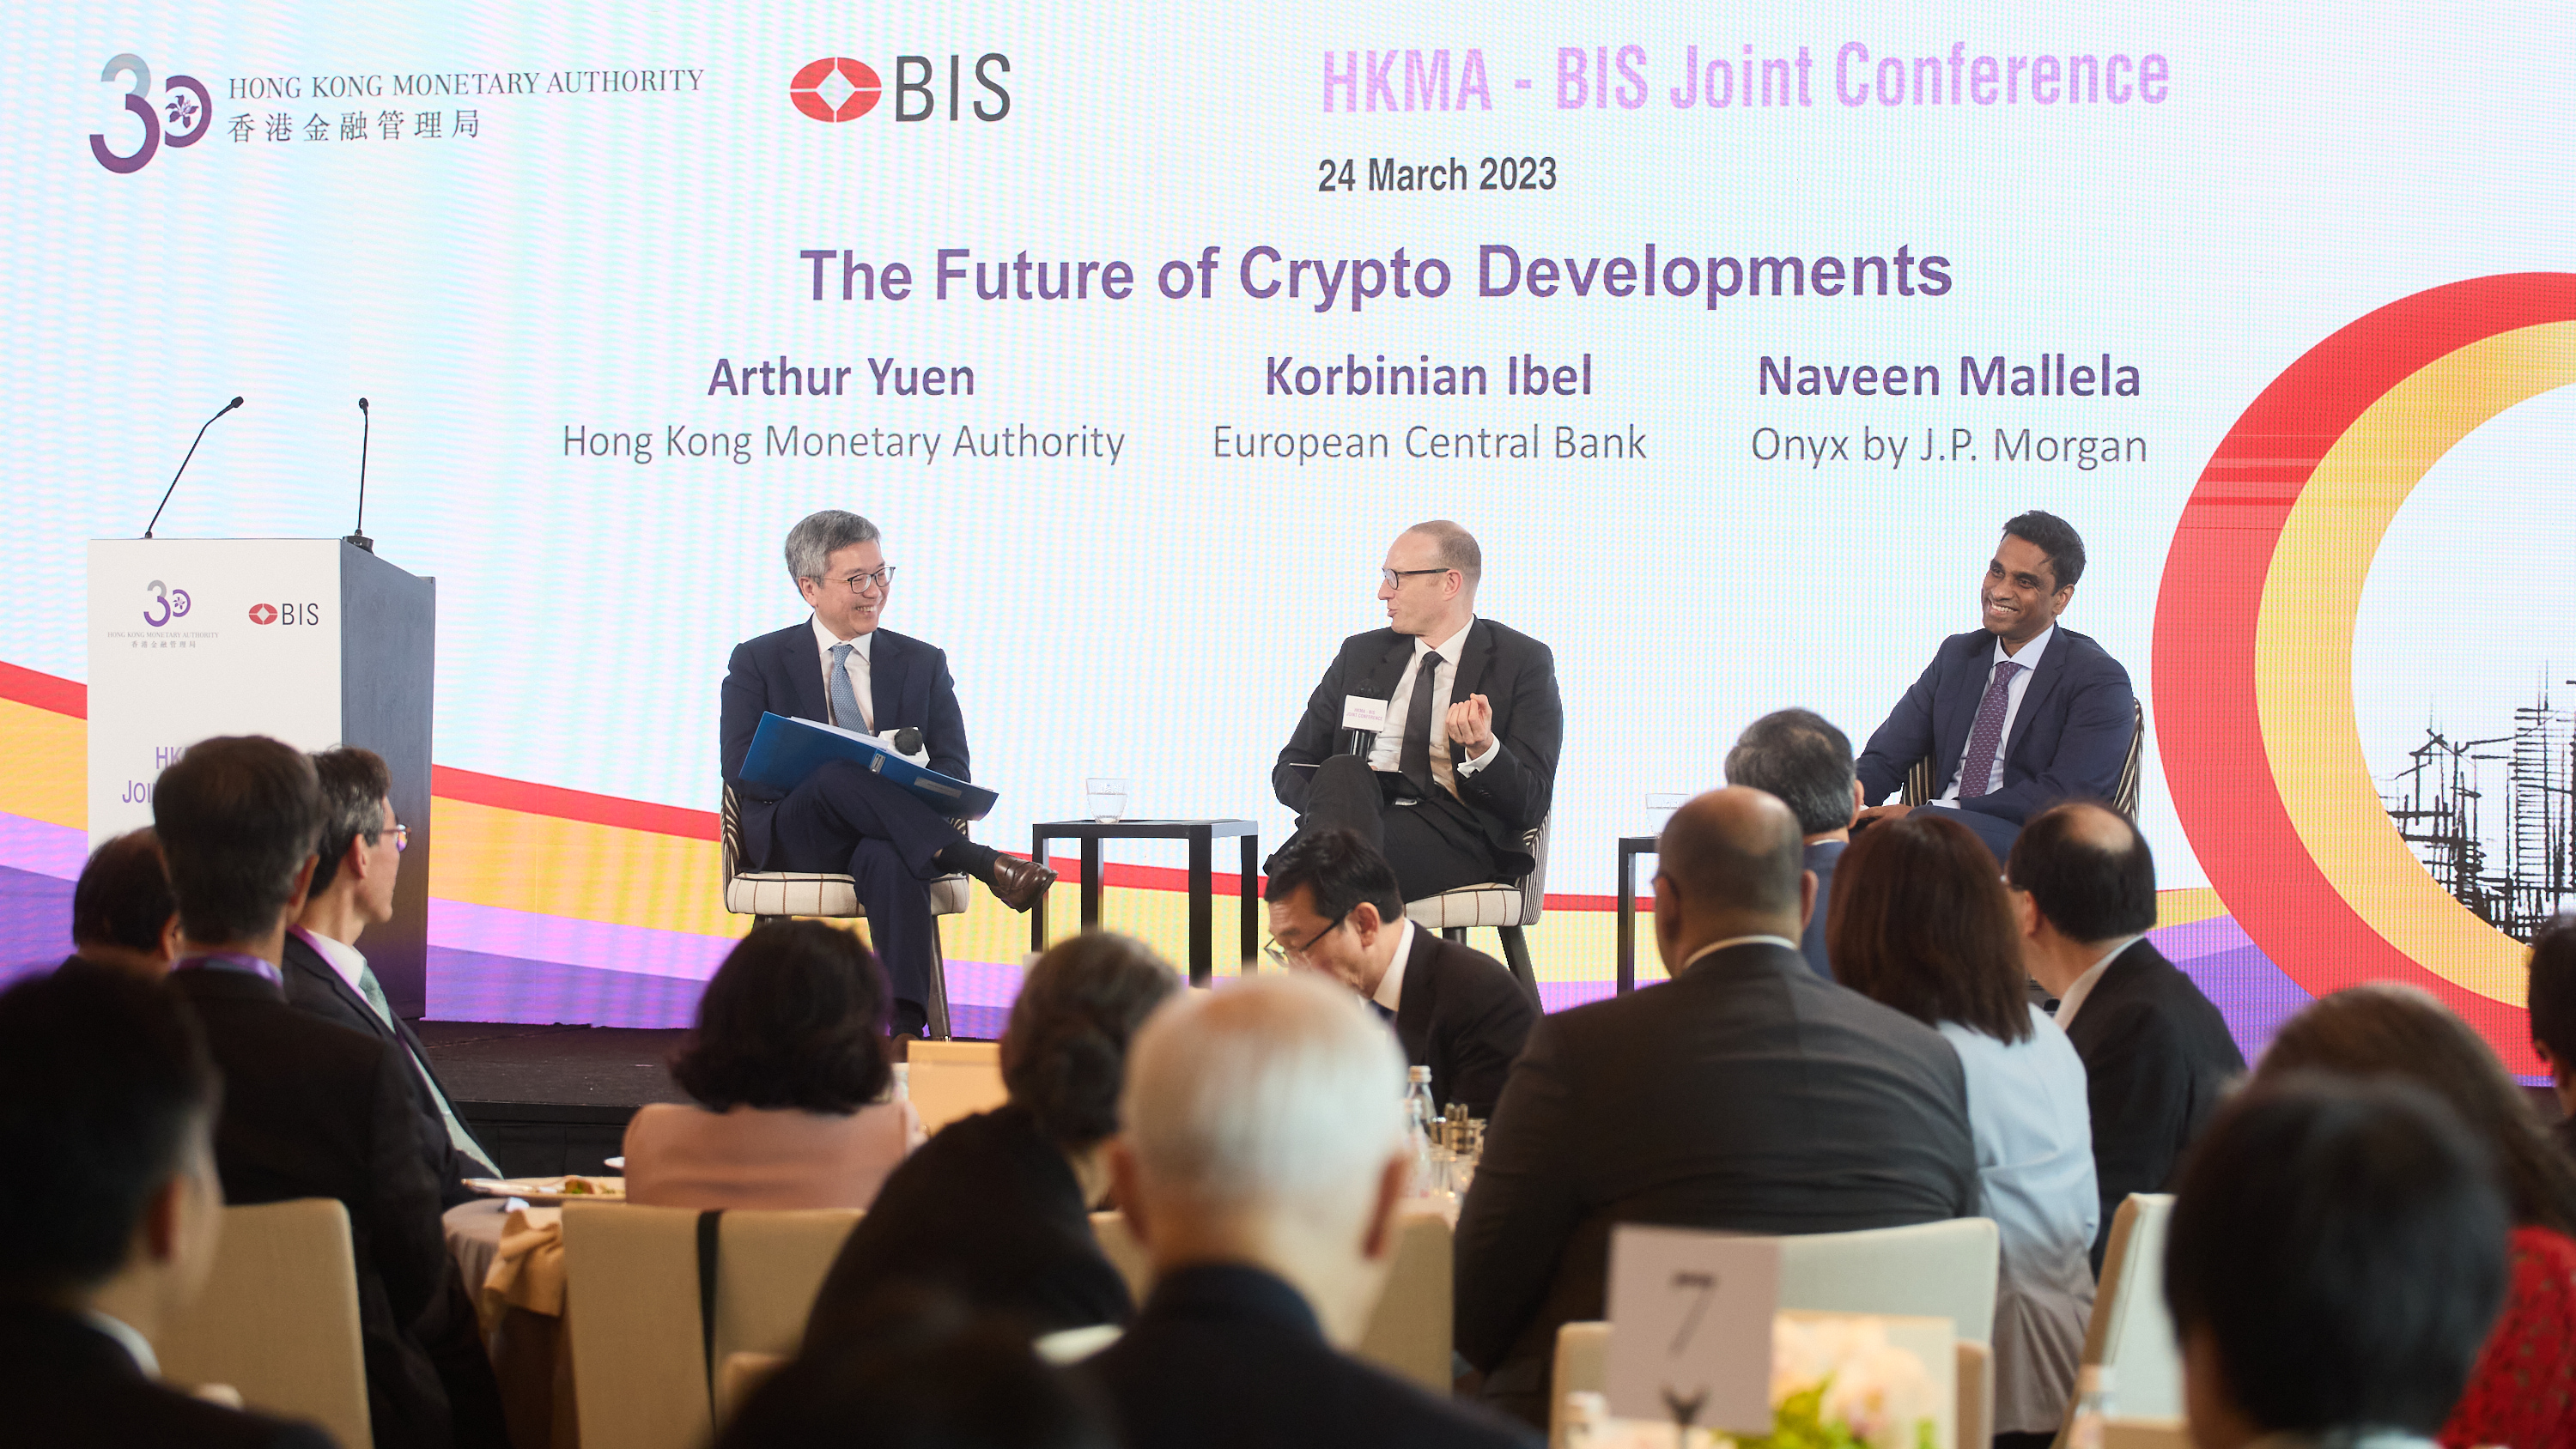 (From left) Mr Arthur Yuen, Deputy Chief Executive of the Hong Kong Monetary Authority, hosts a fireside chat on “The future of crypto developments”. Mr Korbinian Ibel, Director General of the European Central Bank; and Mr Naveen Mallela, Global Head of Coin Systems, Onyx by J.P. Morgan, share their insights on the lessons learnt from recent crypto incidents and explore the future of the crypto market.